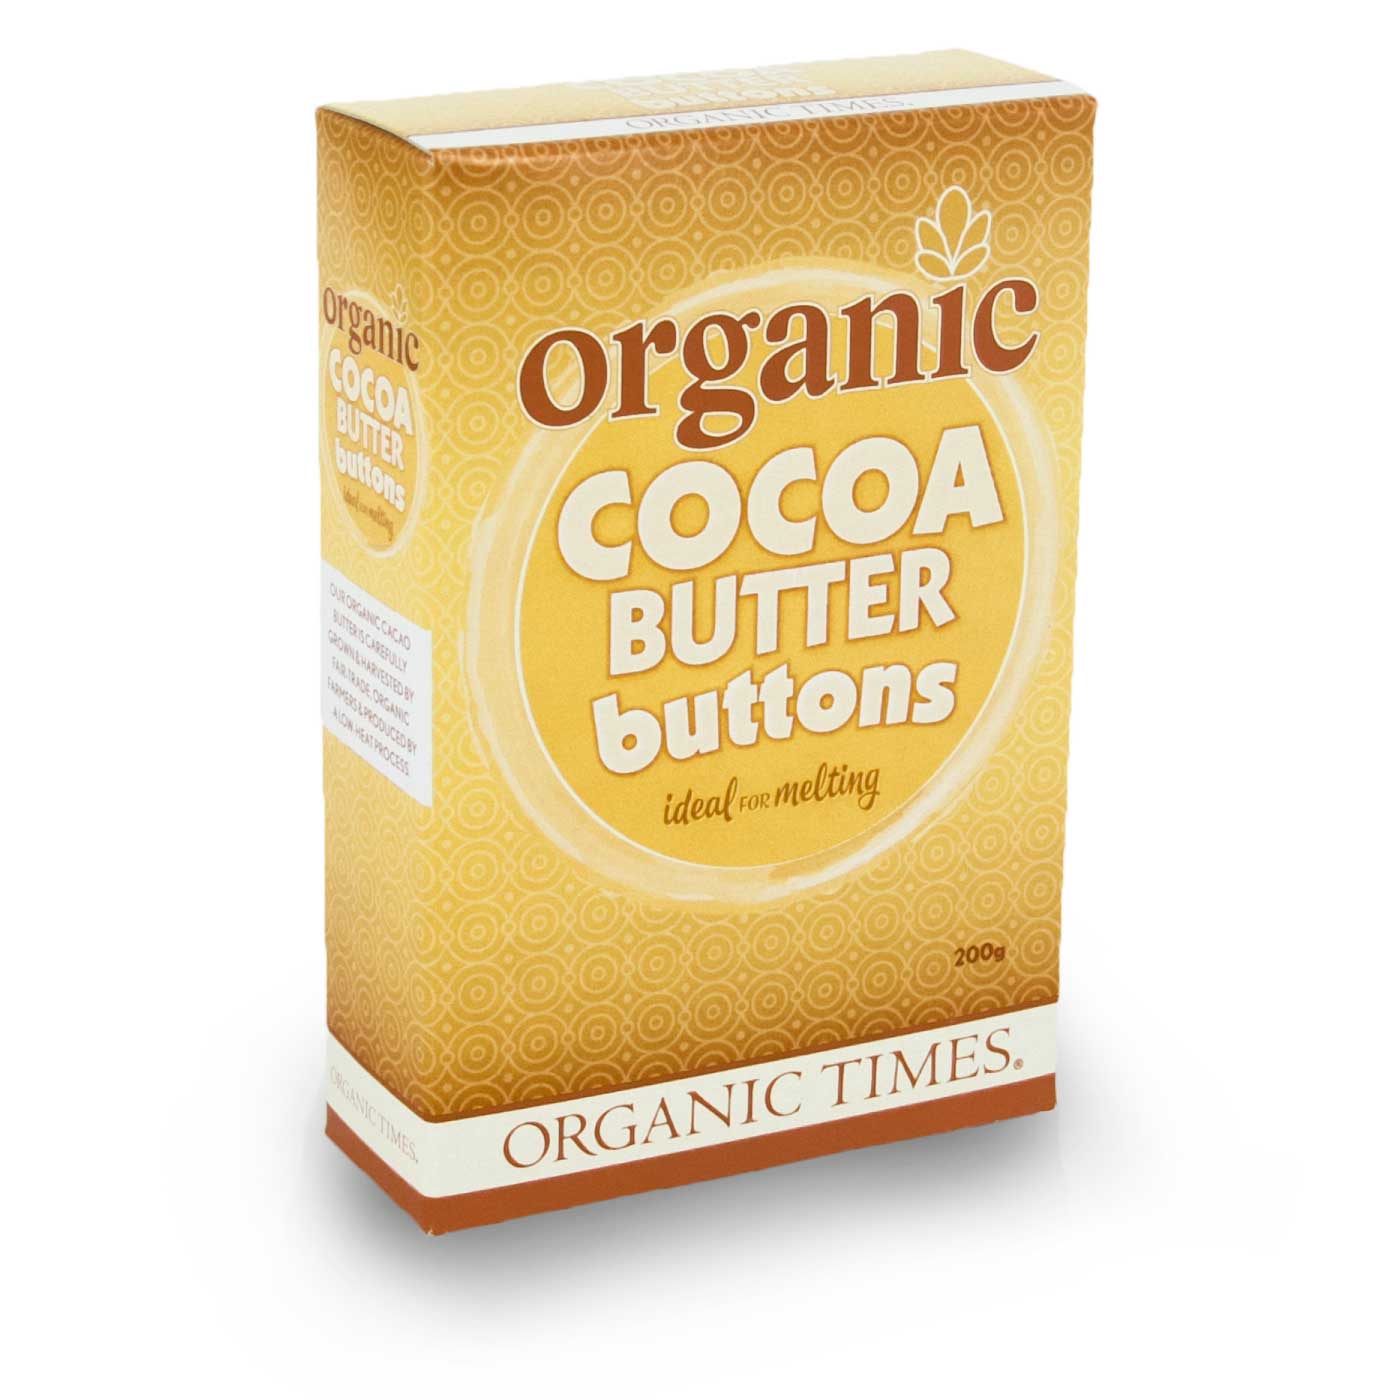 Organic Times Cocoa Butter Buttons 200g-The Living Co.